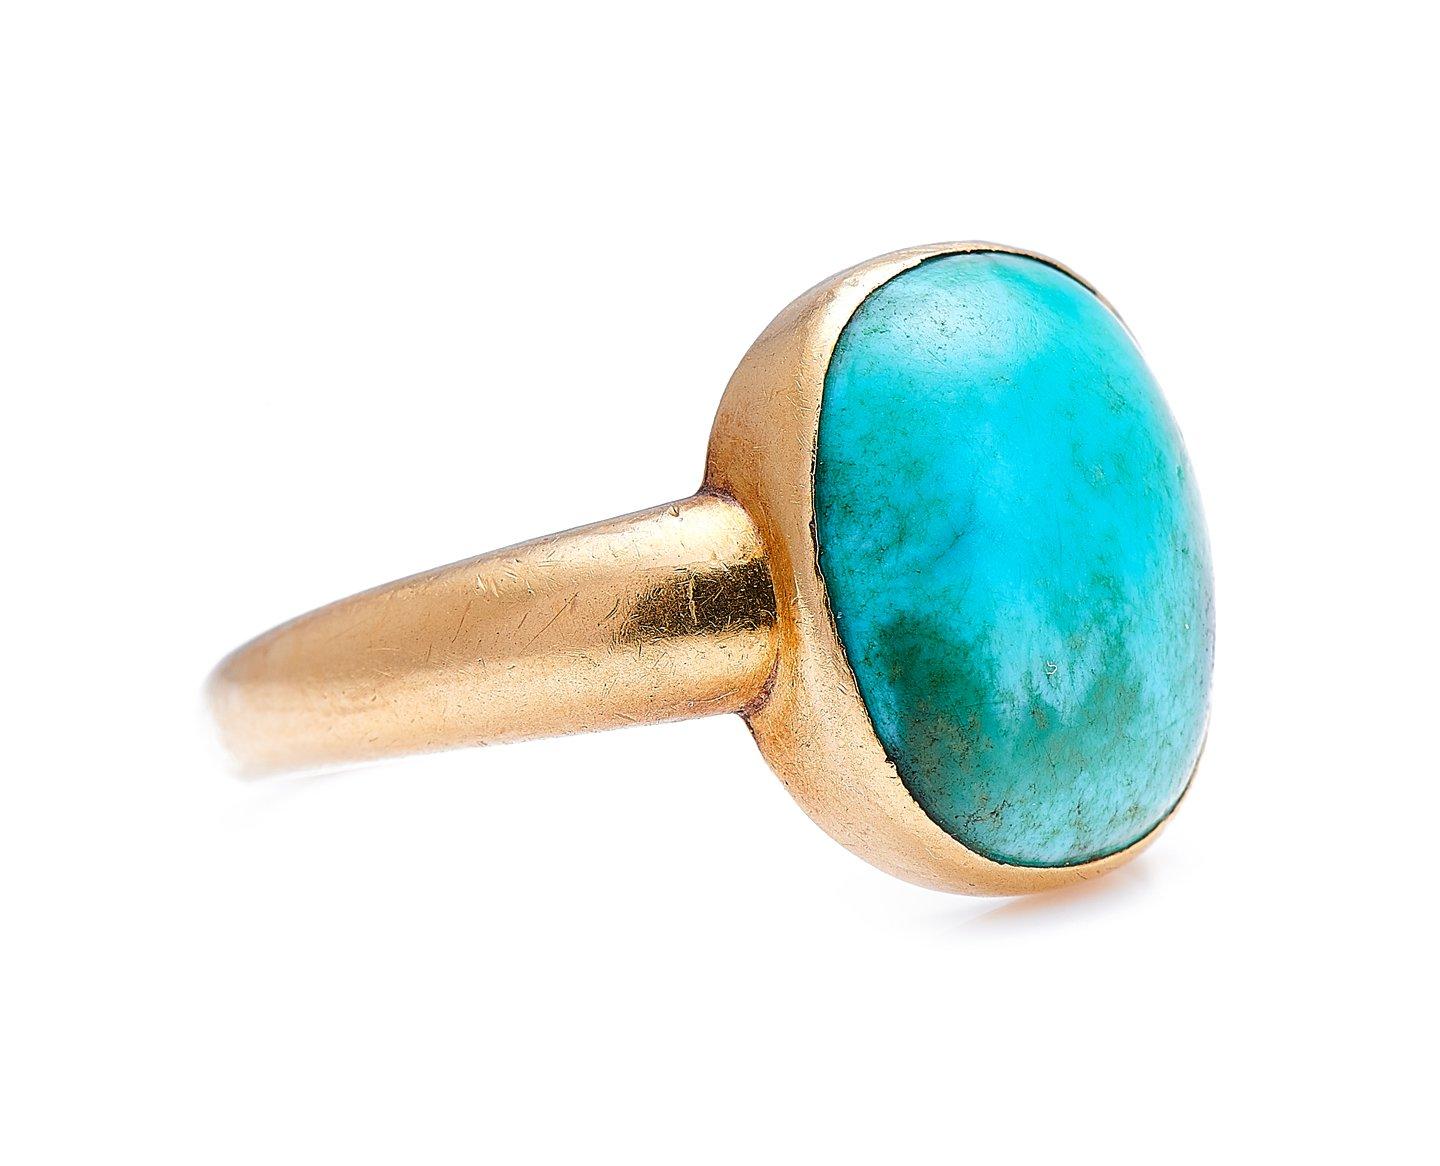 Early 19th century turquoise signet ring. A rare signet ring set with a beautiful natural turquoise in a buttery 22 carat gold setting. This ring is totally original, it looks fantastic when worn. These early rings are so rare to find these days,